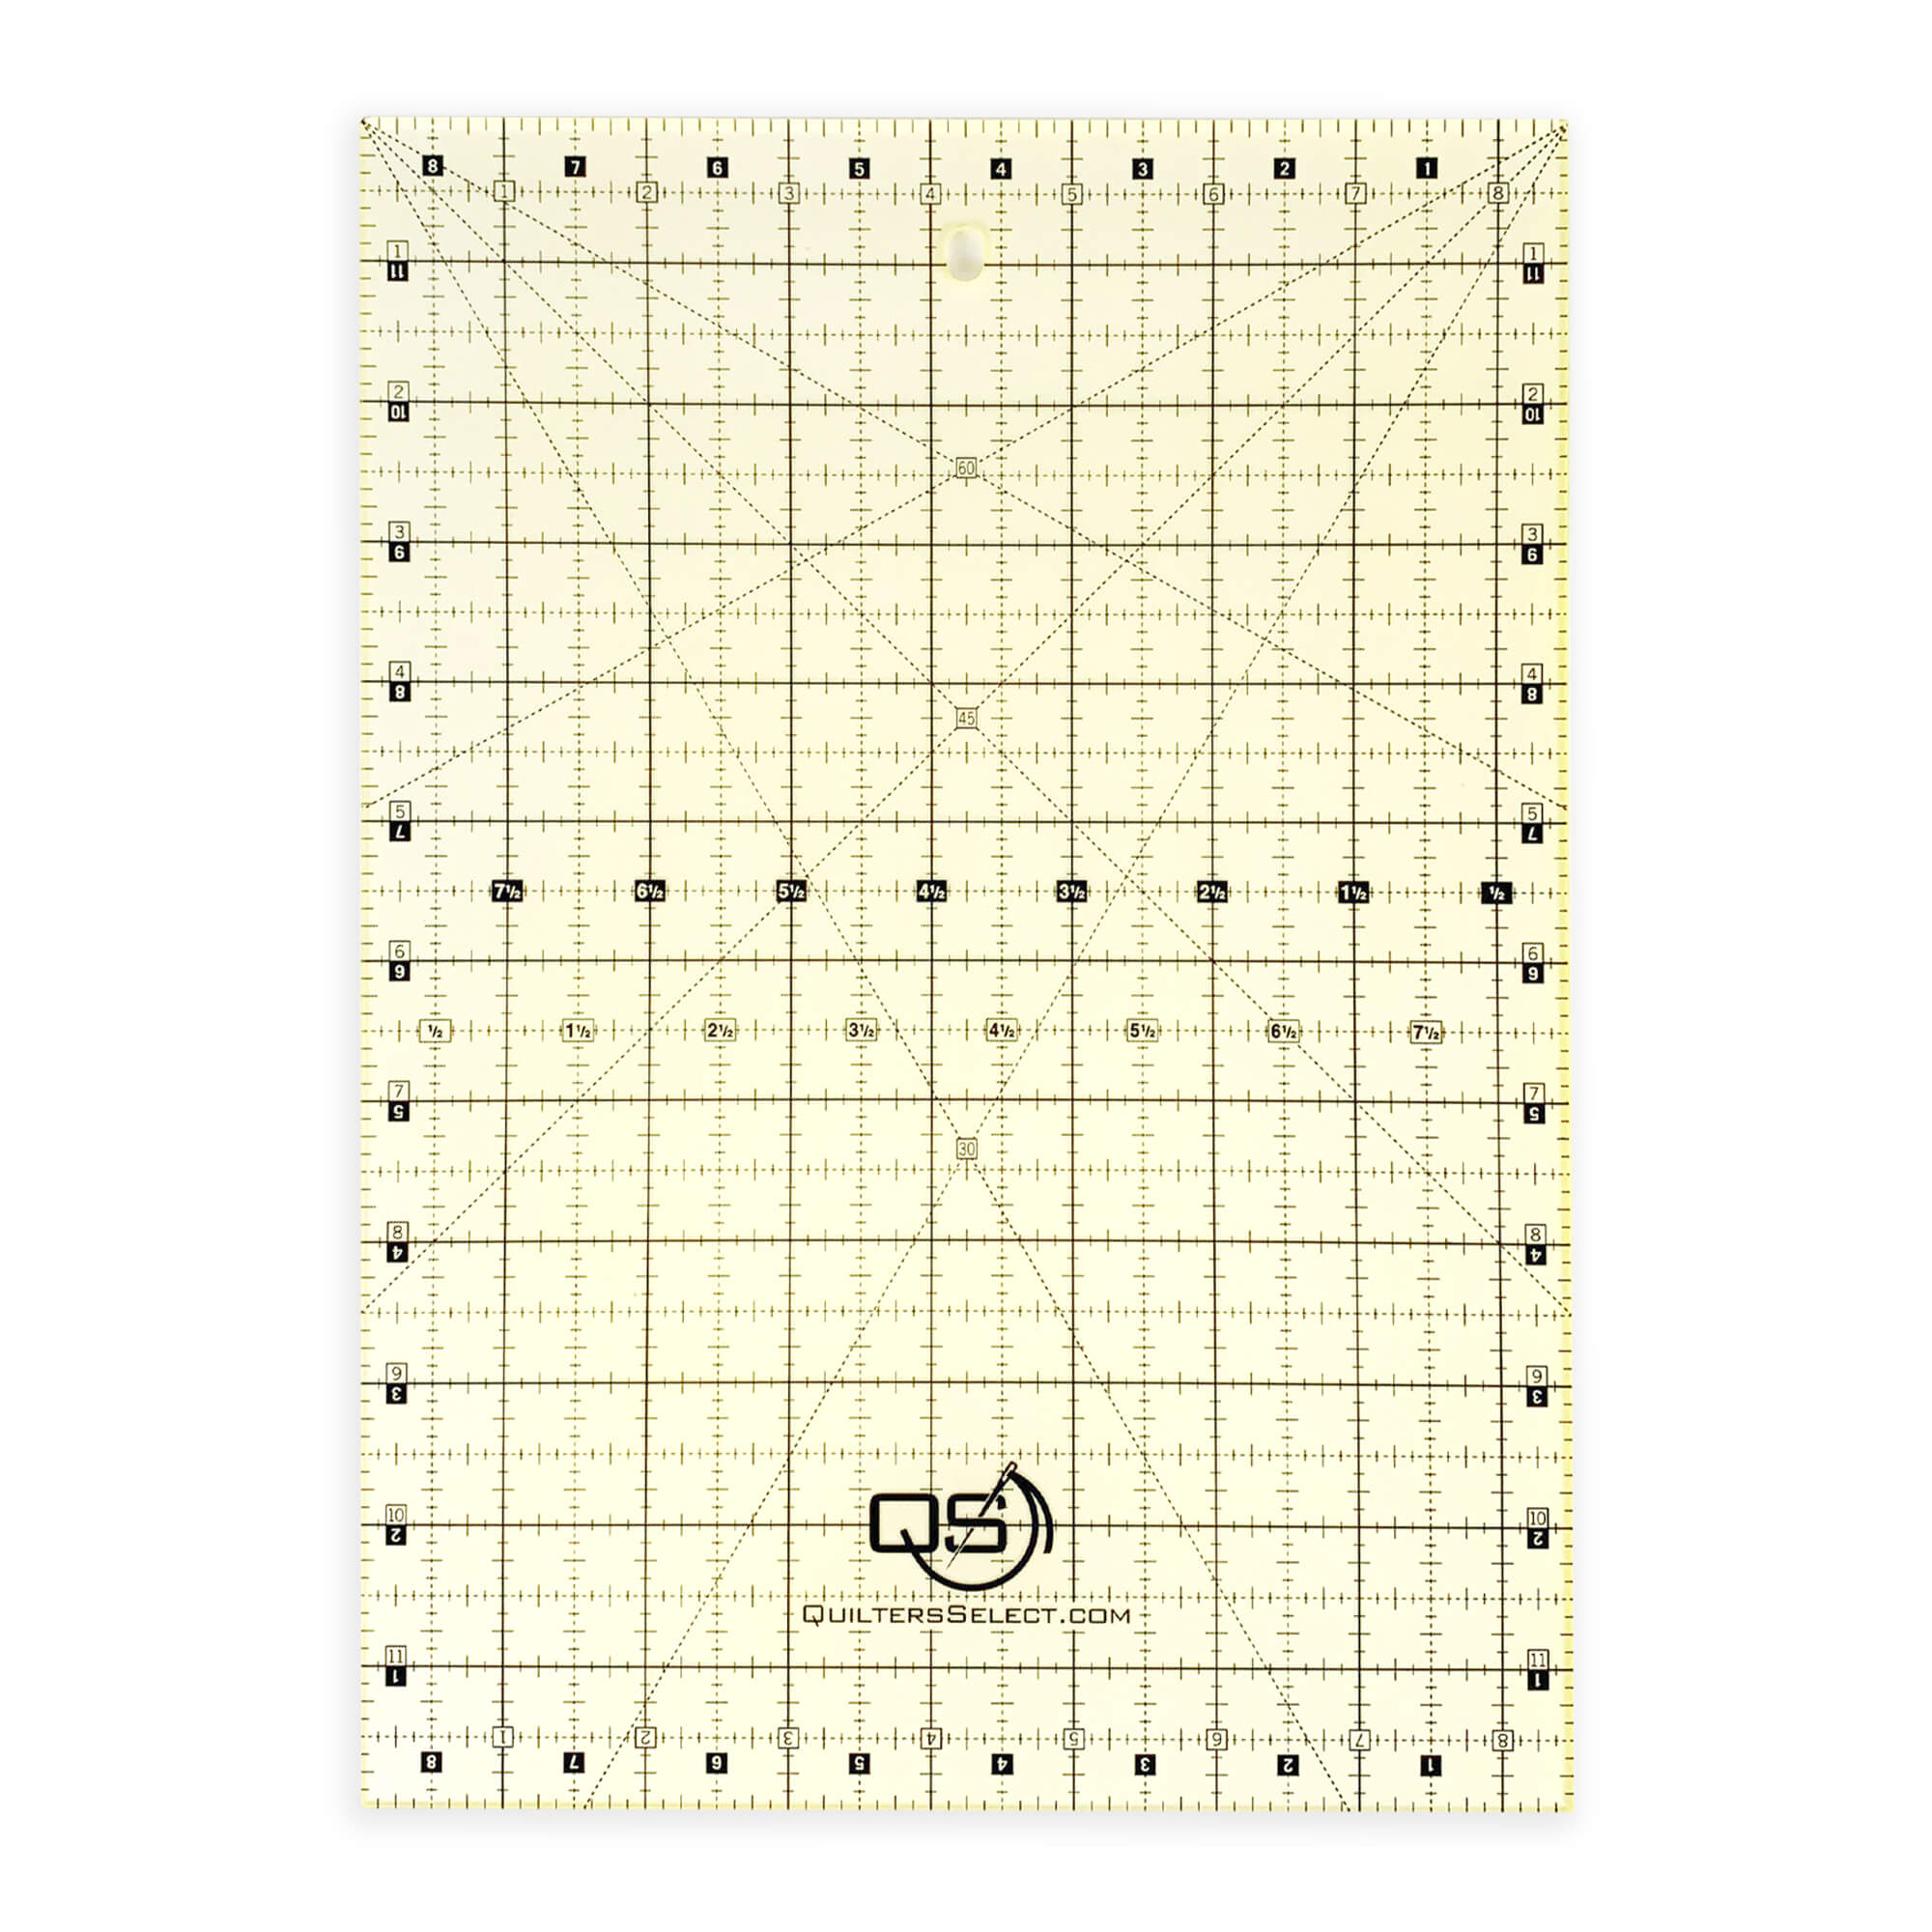 Quilter's Select 2.5 x 12 Non-Slip Ruler